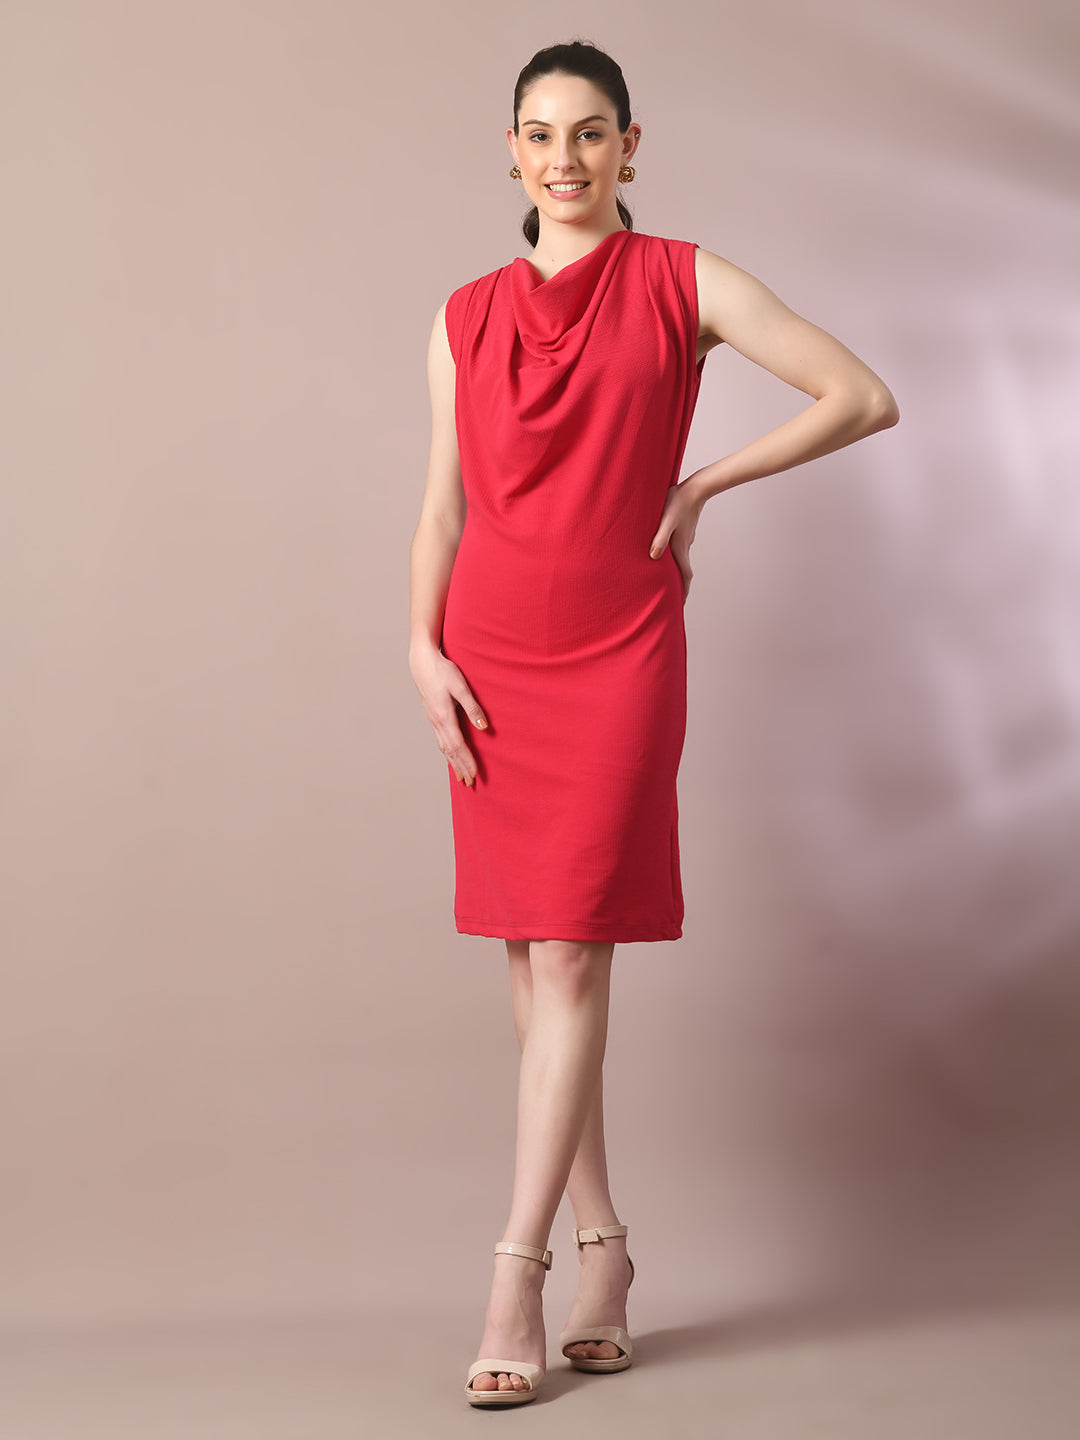 Women's  Pink Solid Cowl Neck Bodycon Party Dress  - Myshka